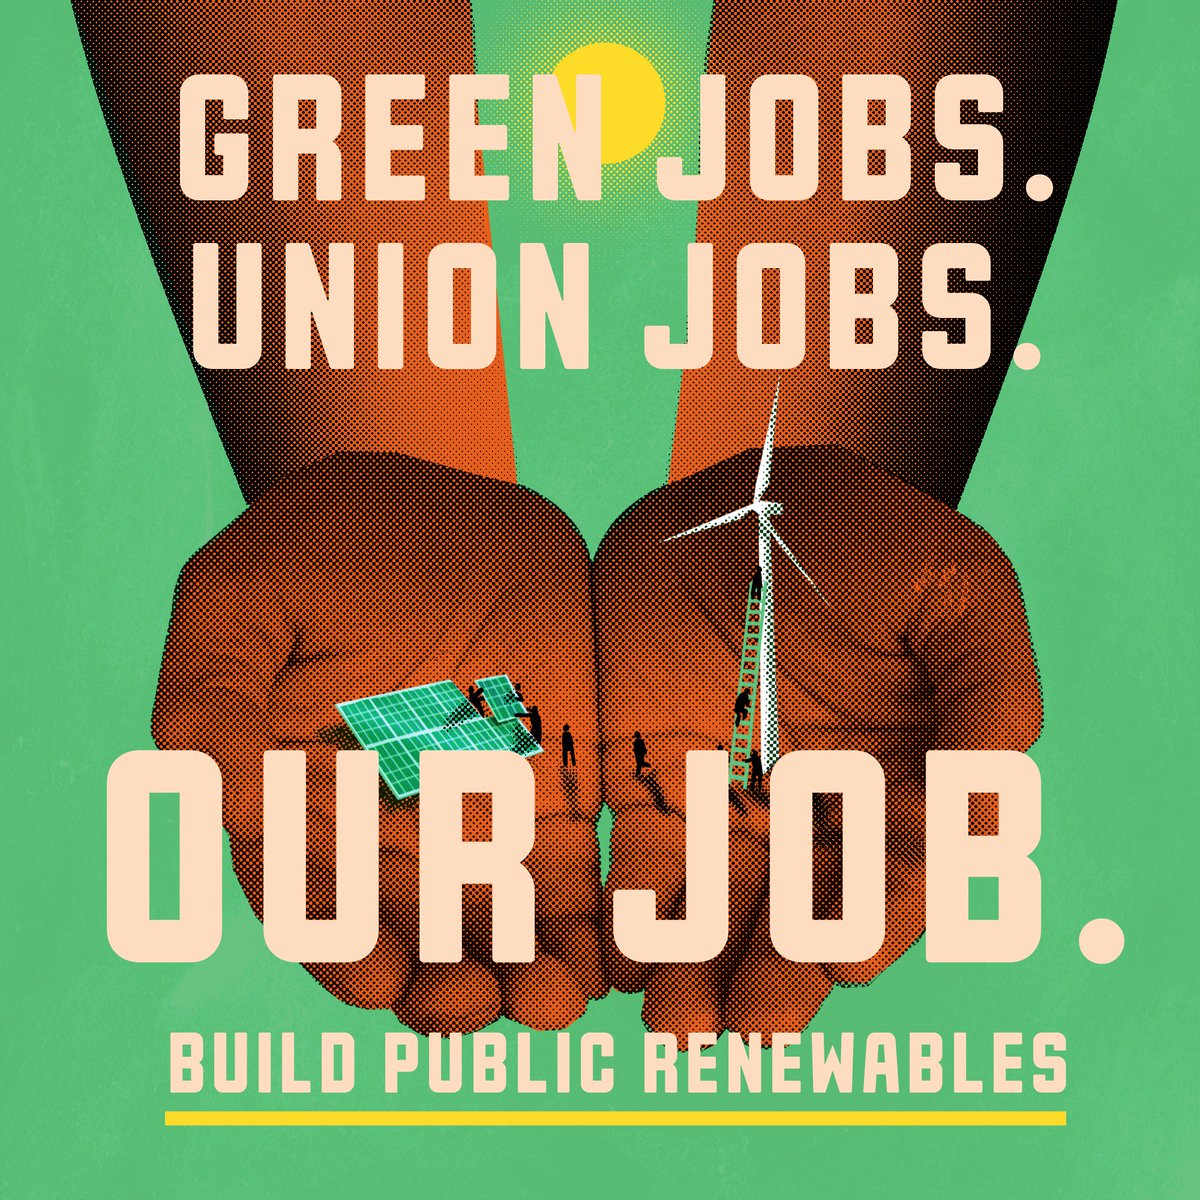 The #BuildPublicRenewables Act is essential for a just transition. We must act now and build our future on good, green, union jobs. @GovKathyHochul @CarlHeastie, follow the NY Senate's lead and pass the full BPRA, not BPRA-lite. bit.ly/bpranyr #ClimateJobsJustice